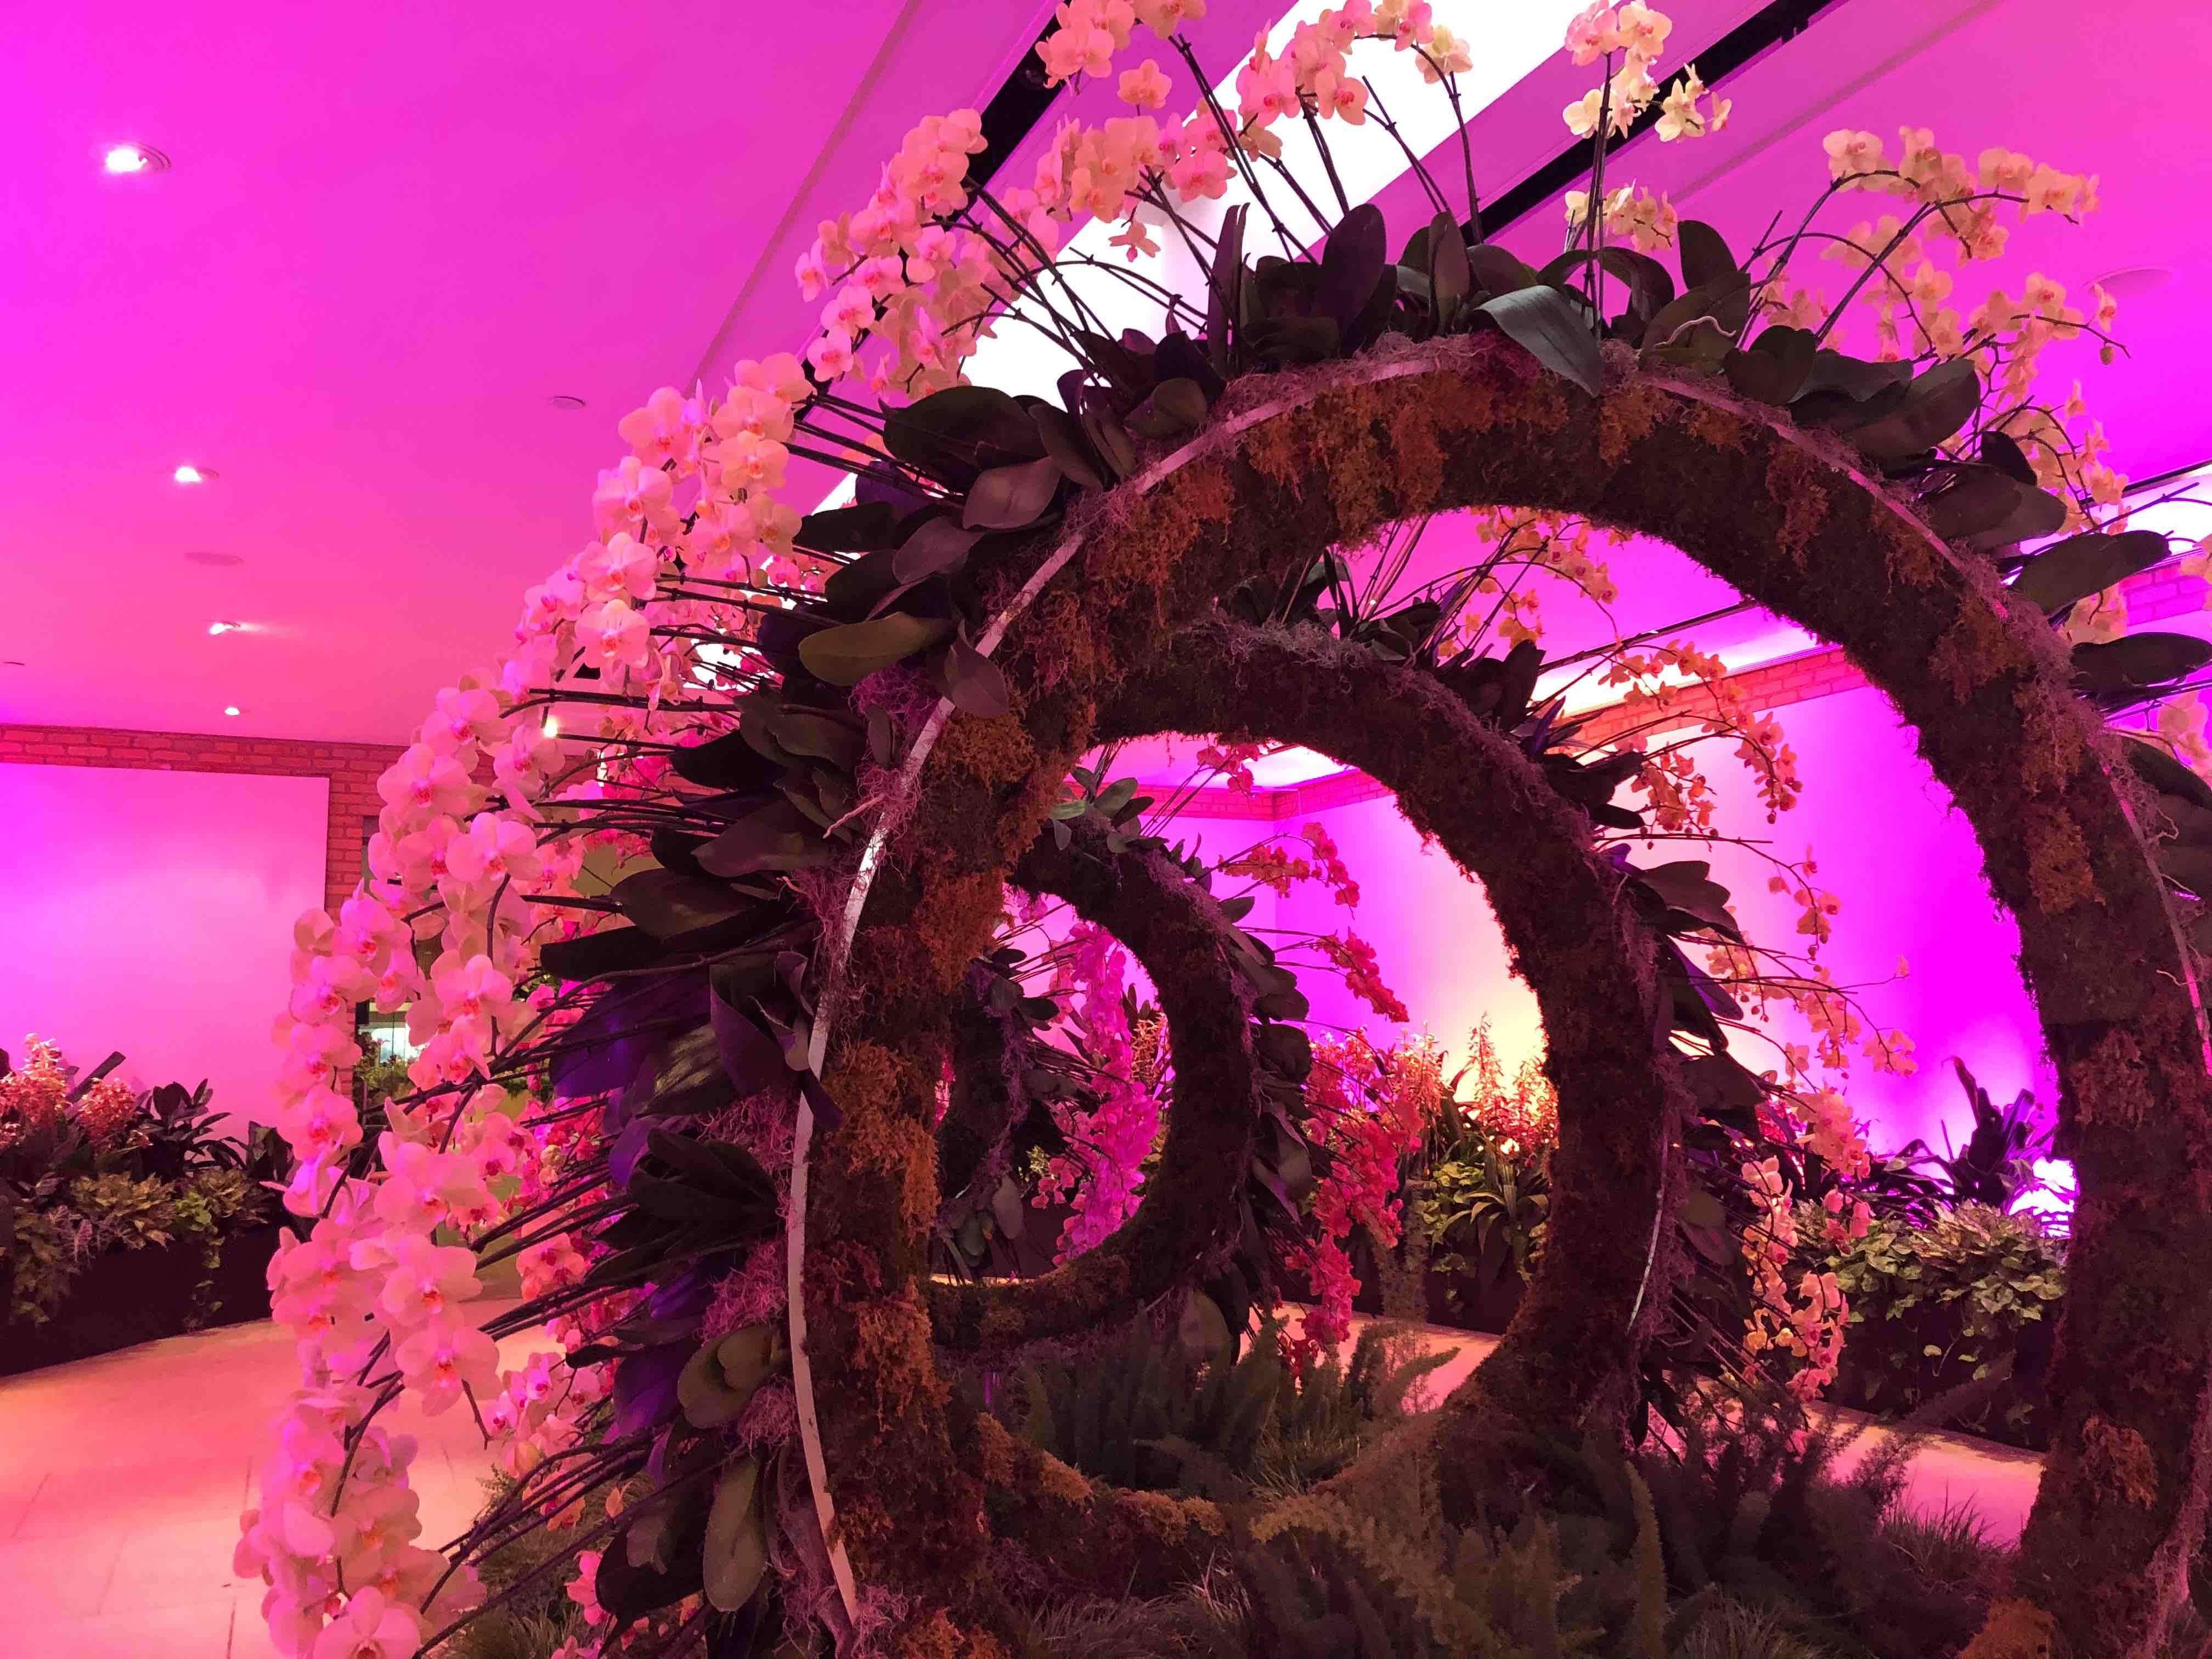 The telescope-shaped "Halo" is one of the highlights of the Chicago Botanic Garden's orchid show. "As soon as we opened ... you could see the logjam there," said Jodi Zombolo. "You can't help but stop and want to take a photo there." (Patty Wetli / WTTW News)